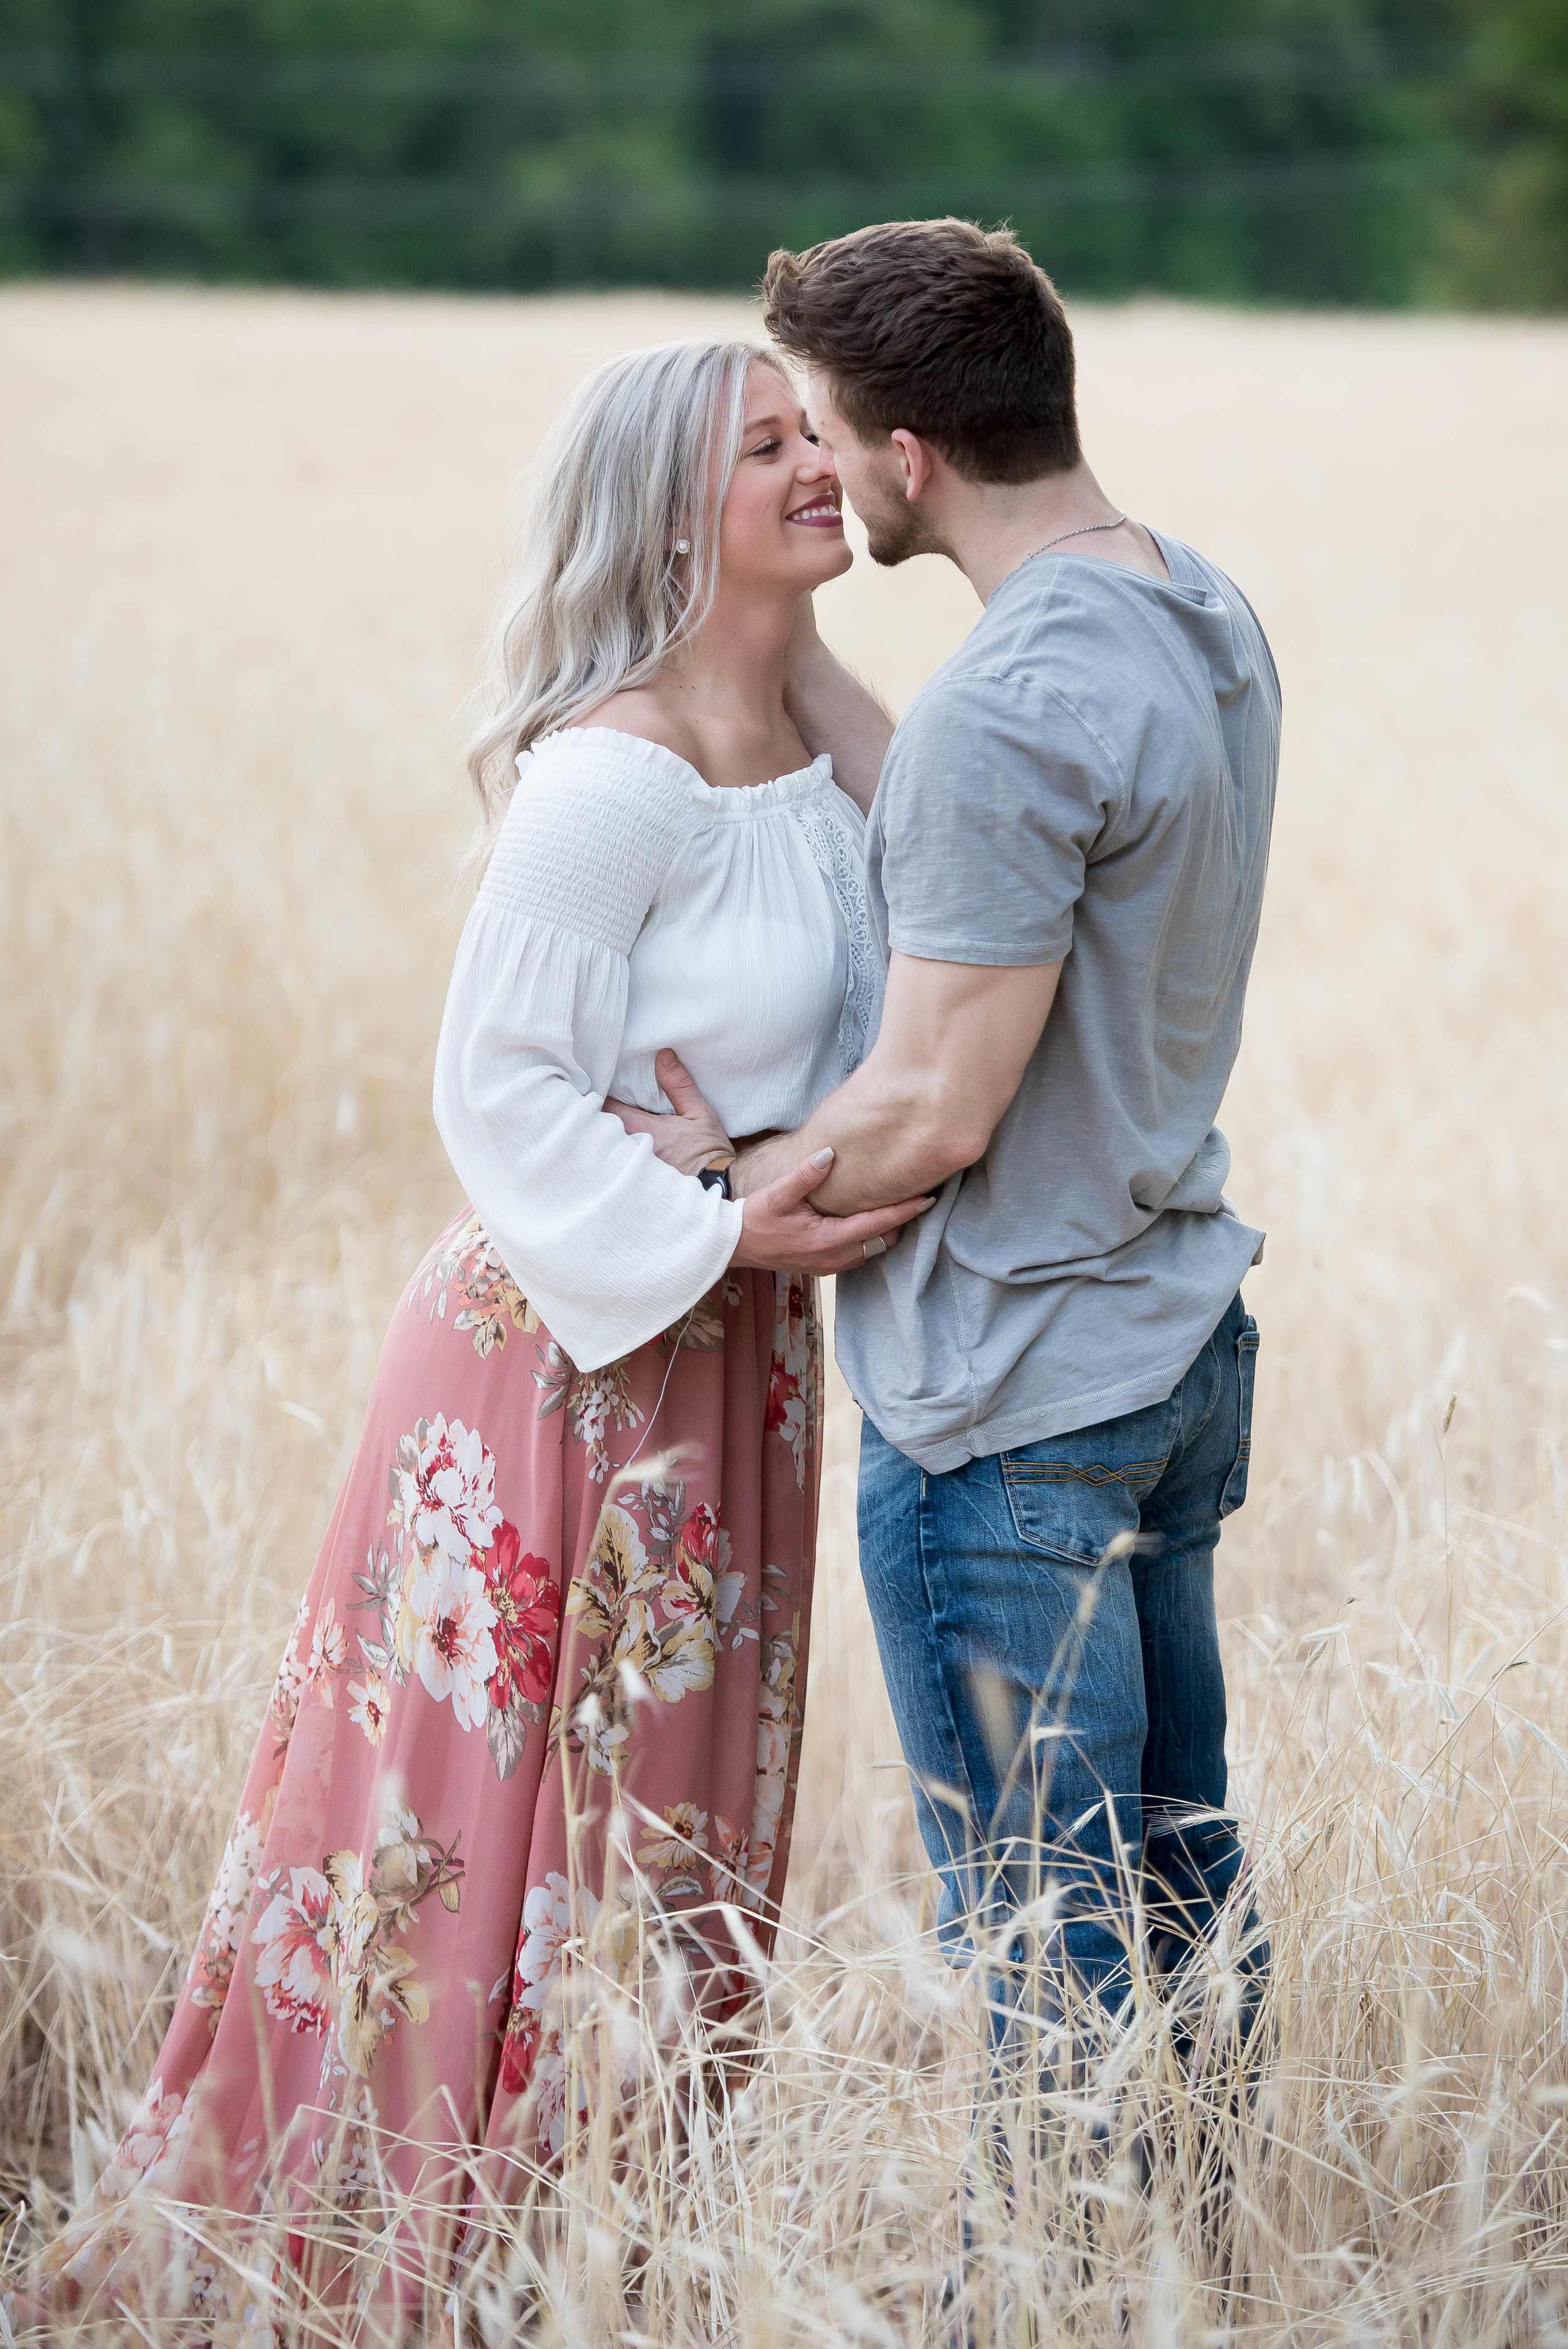 Couple Session - Fitness Couples - Tall Grass Field - Engagement Portrait Ideas - Engagement Session Ideas - Couple Session Ideas - Spring Picture Ideas-20.jpg